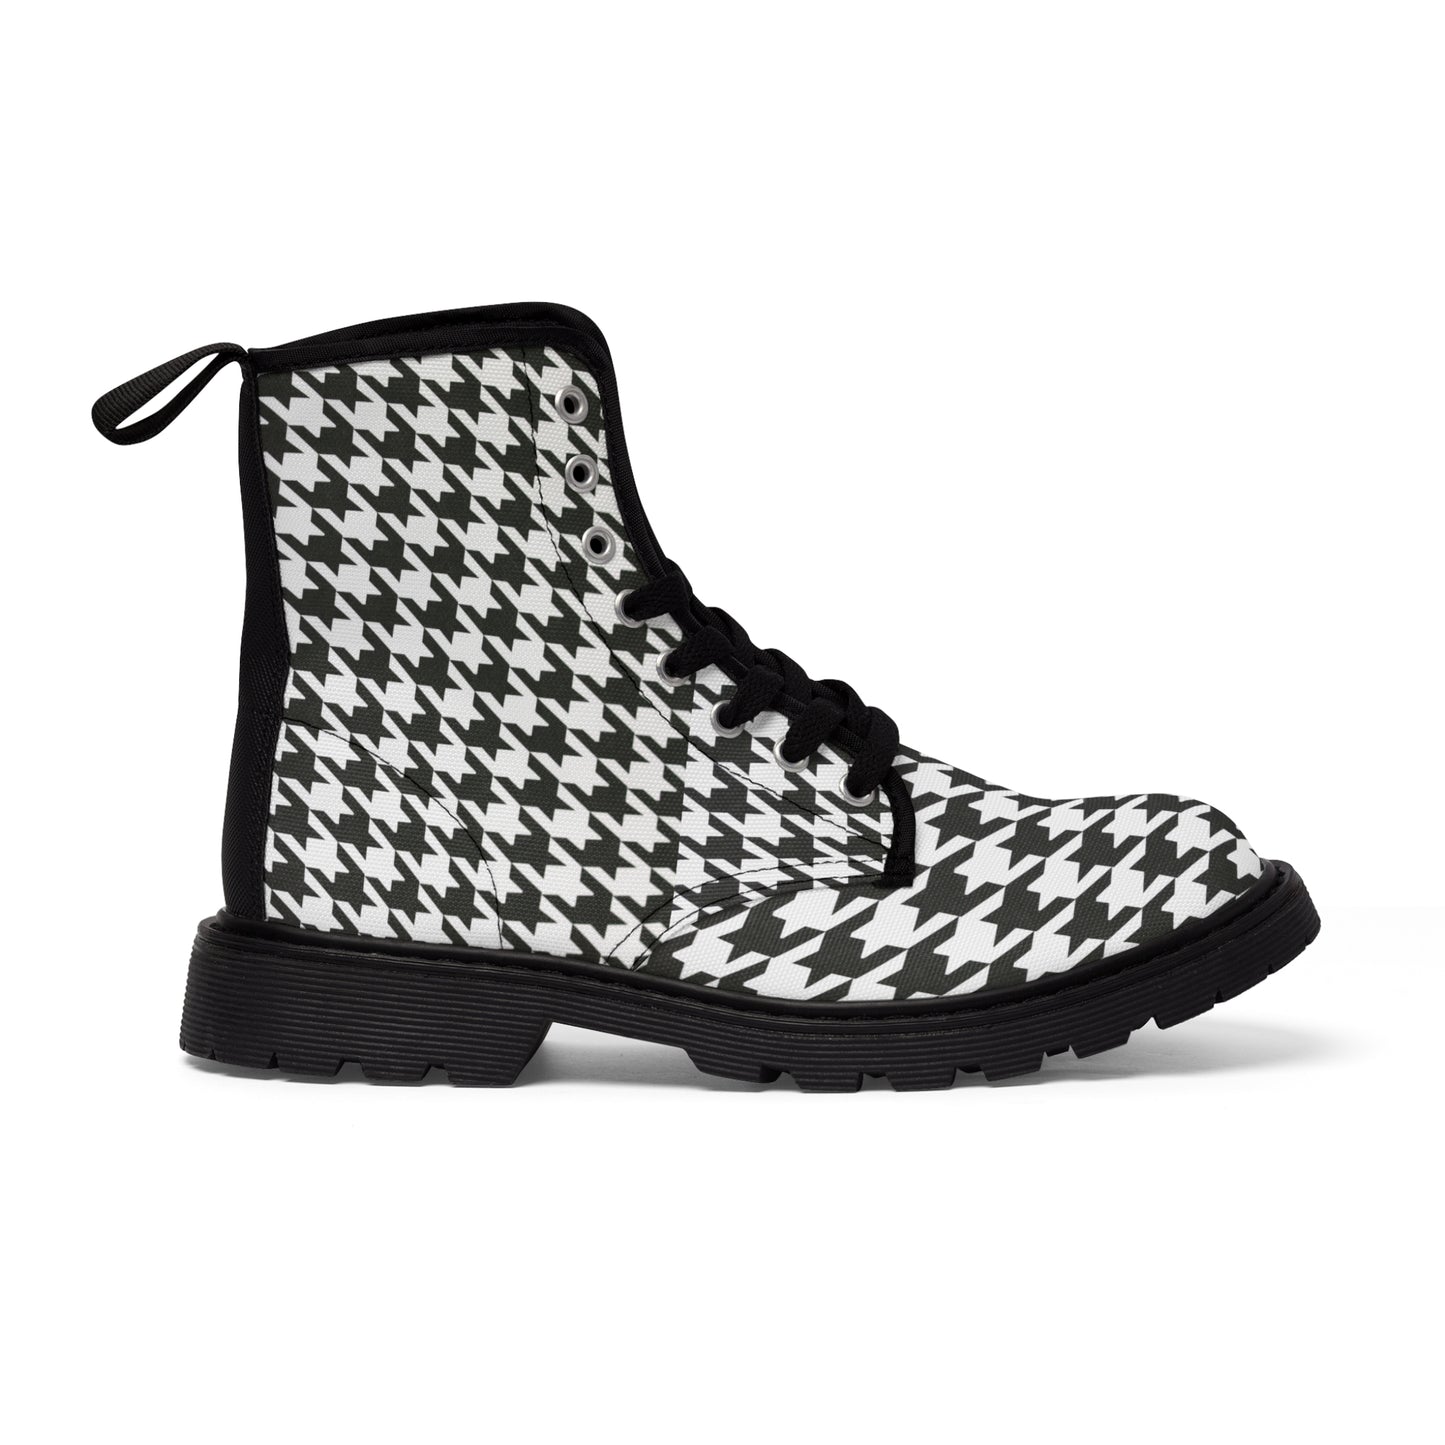 "Classic Hounds tooth" Women's Rebel Boots